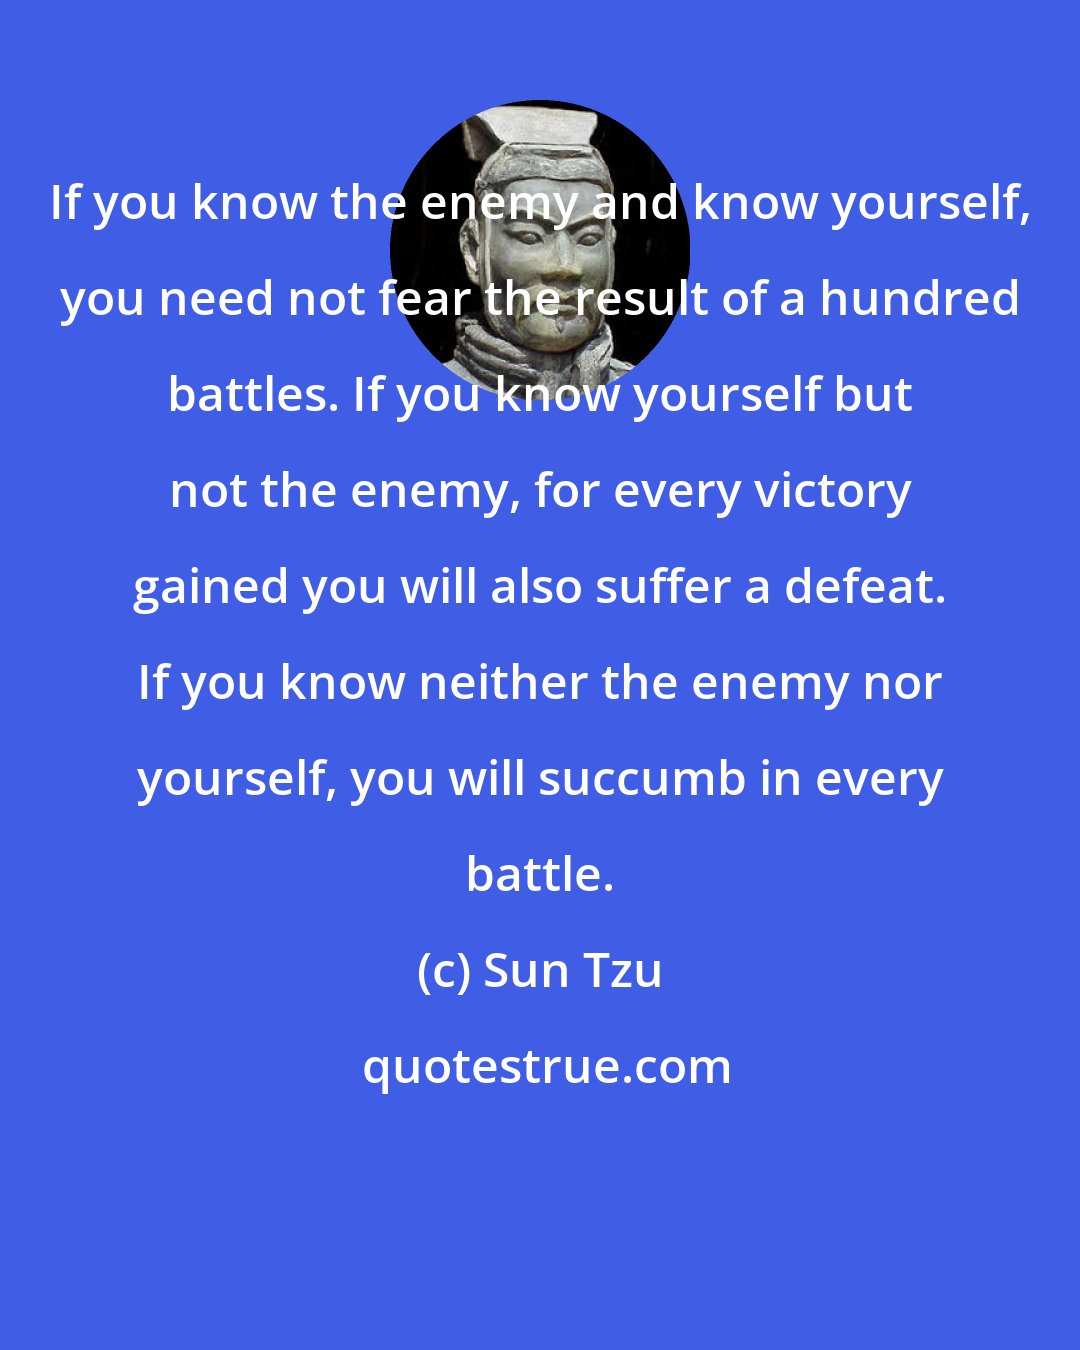 Sun Tzu: If you know the enemy and know yourself, you need not fear the result of a hundred battles. If you know yourself but not the enemy, for every victory gained you will also suffer a defeat. If you know neither the enemy nor yourself, you will succumb in every battle.